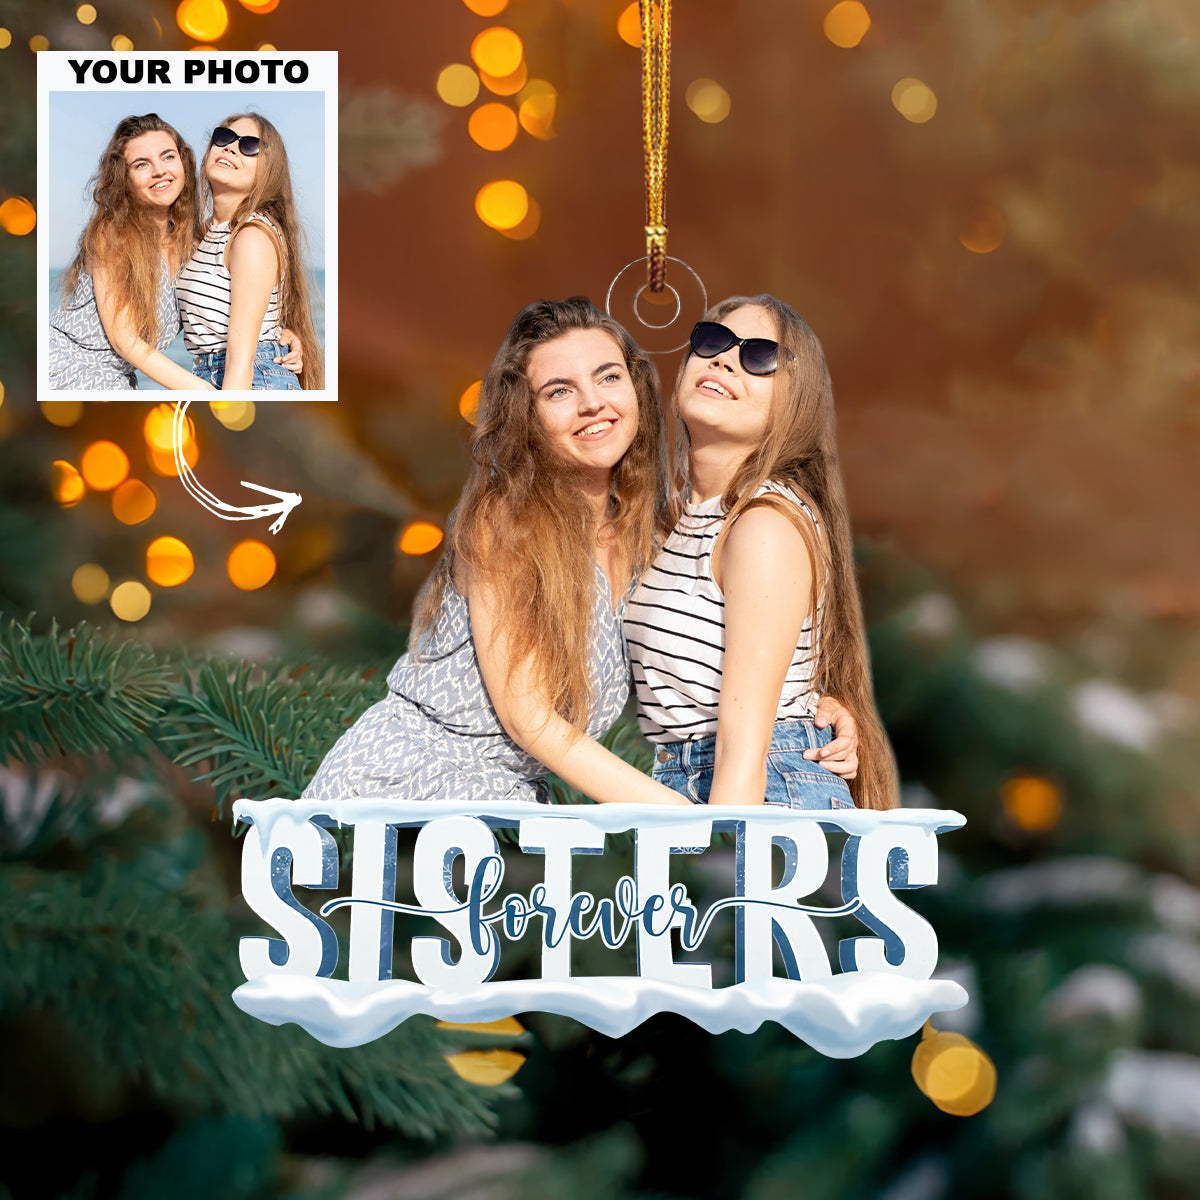 Sisters Forever Merry Christmas - Personalized Custom Photo Mica Ornament - Christmas Gift For Friends, Besties, Family Members UPL0DM009